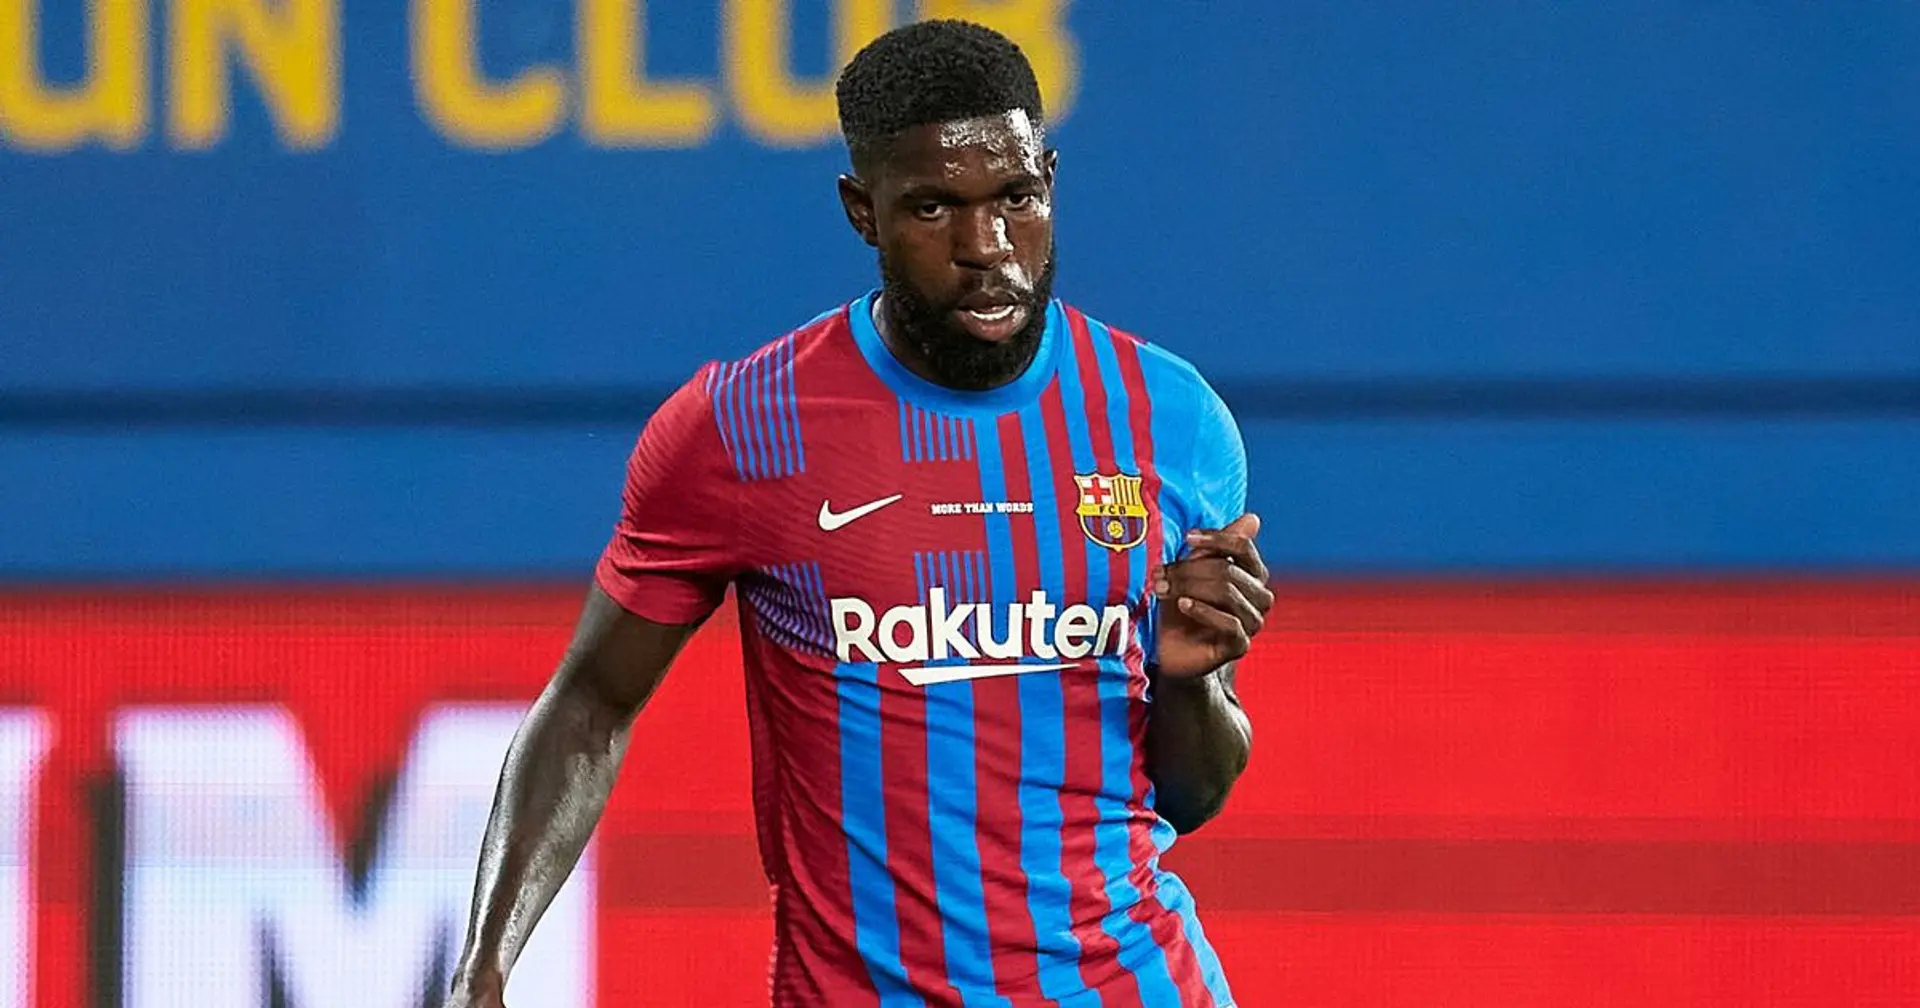 Umtiti has offers from 3 clubs, Koeman tells Samuel he can leave (reliability: 4 stars)